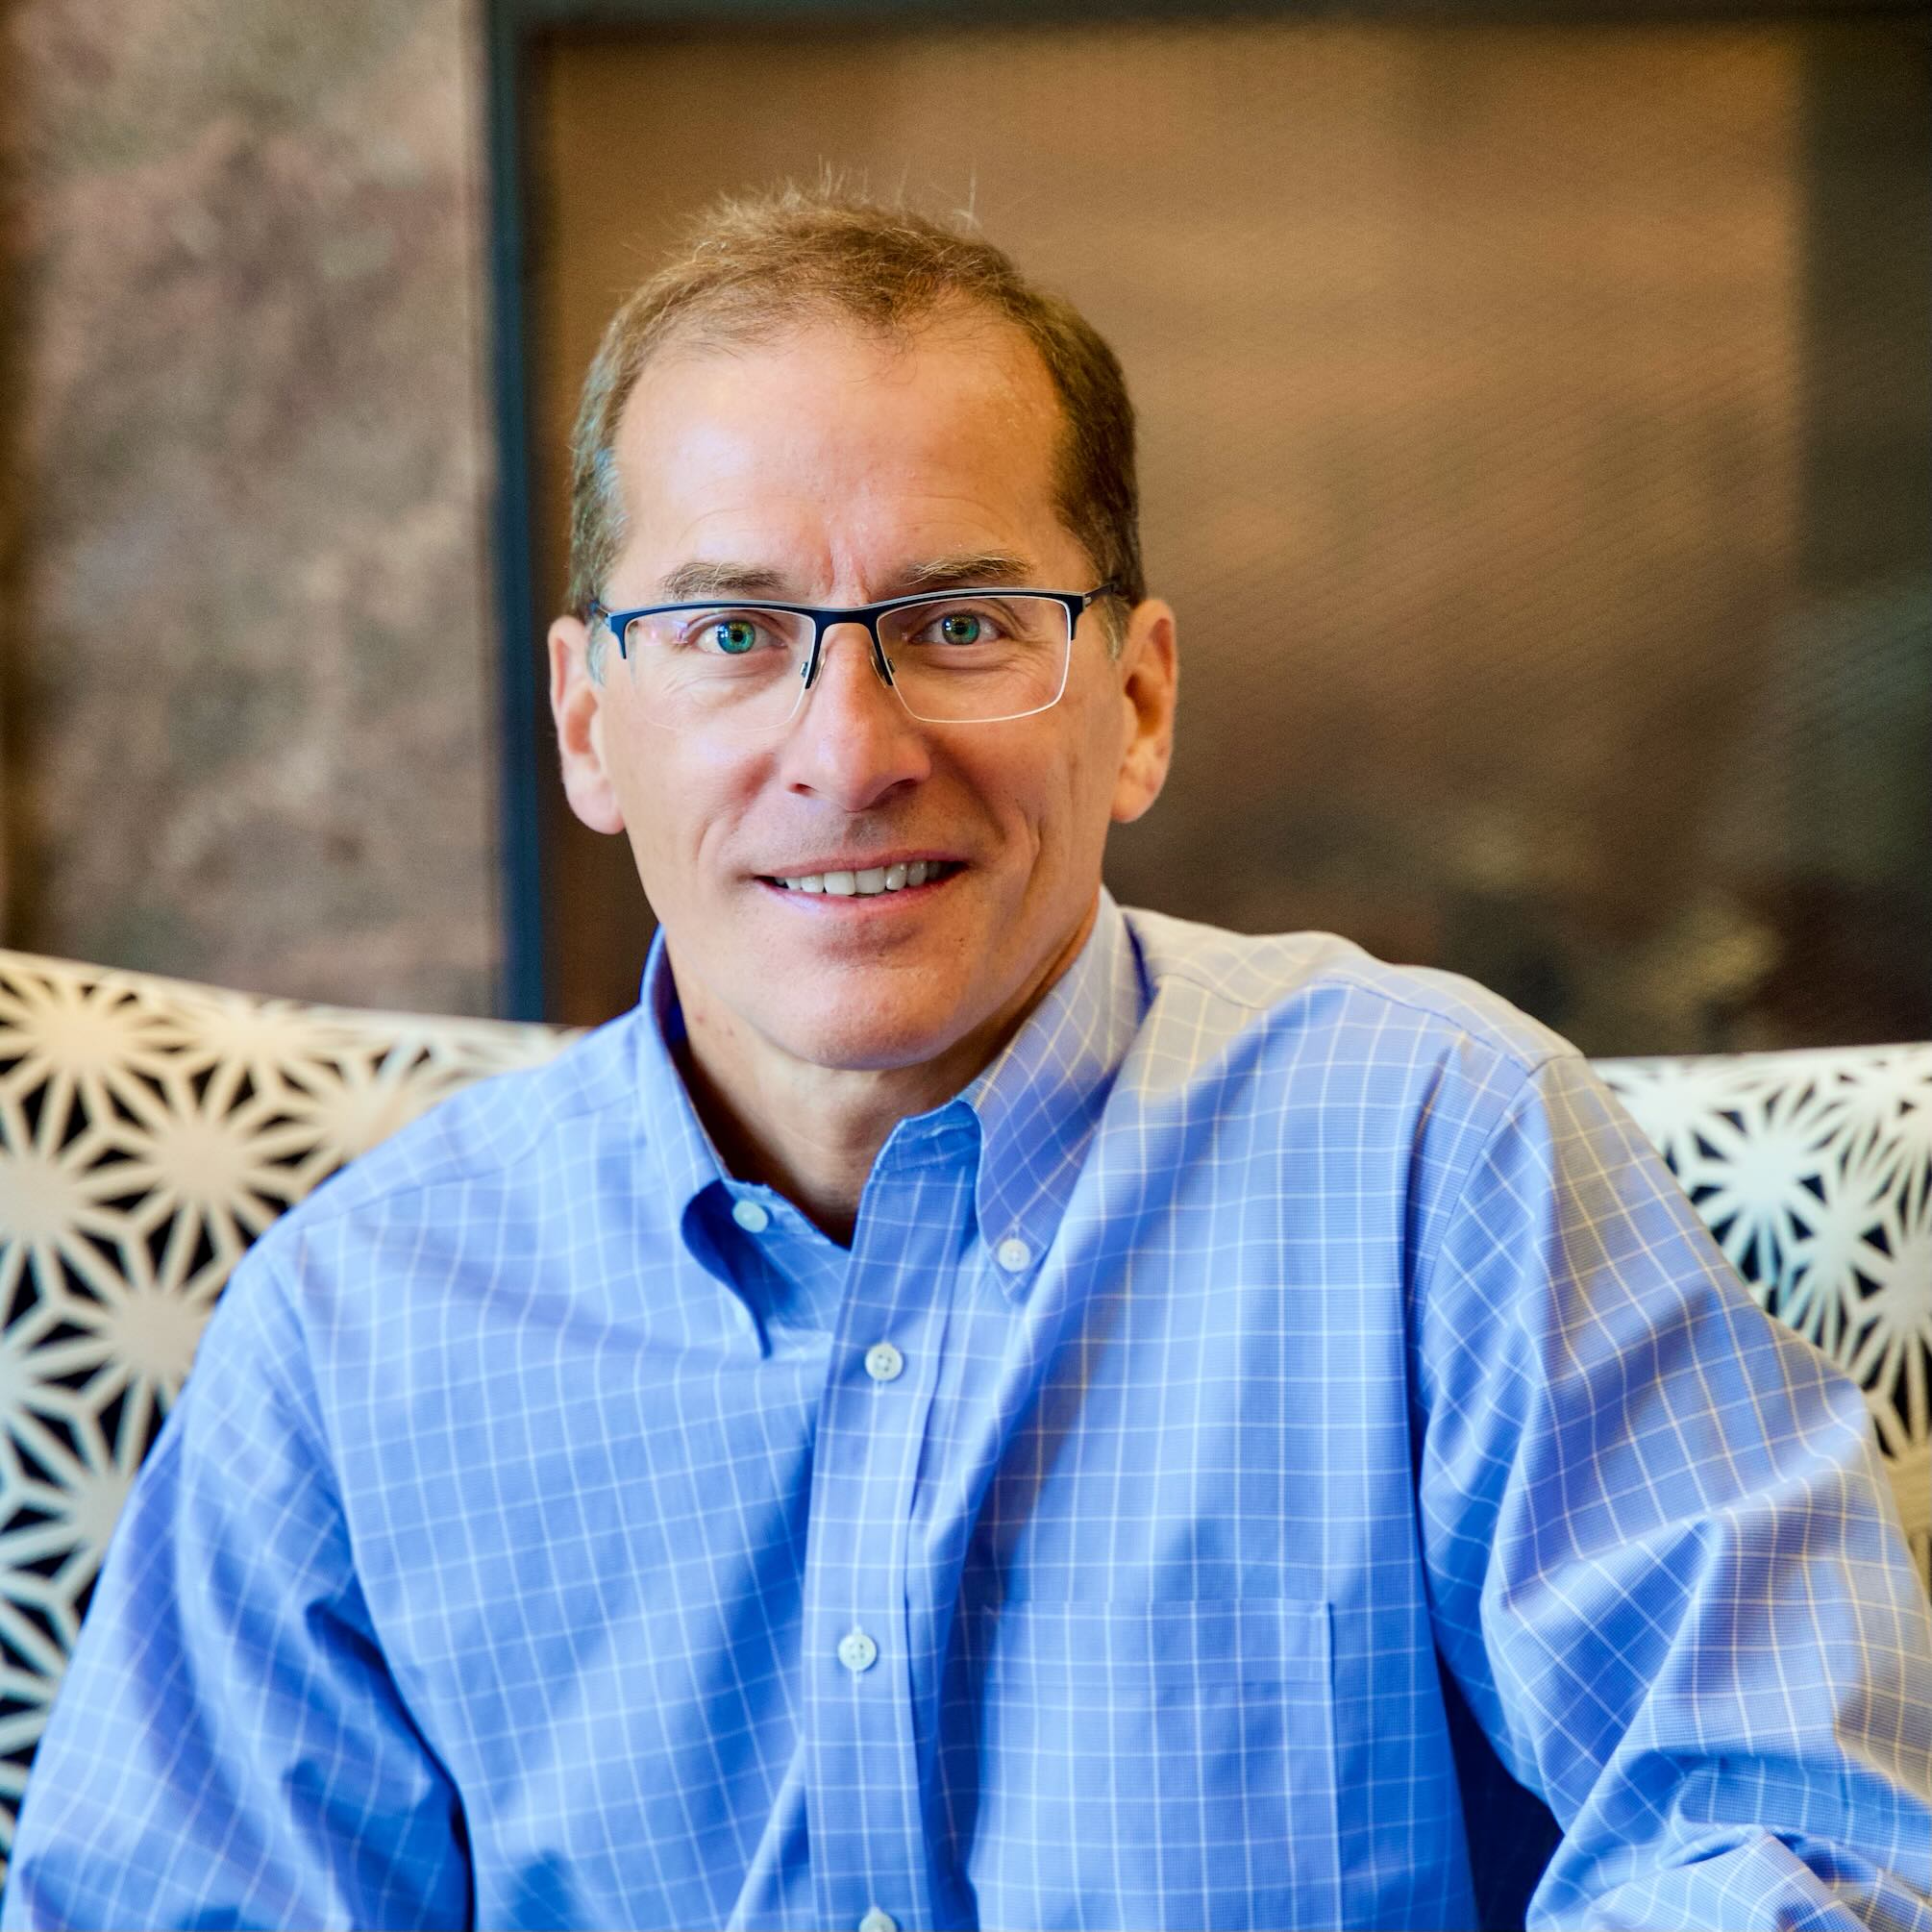 Portrait of R. Sean Churchill, MD, MBA, Genesis Innovation Group Executive Director